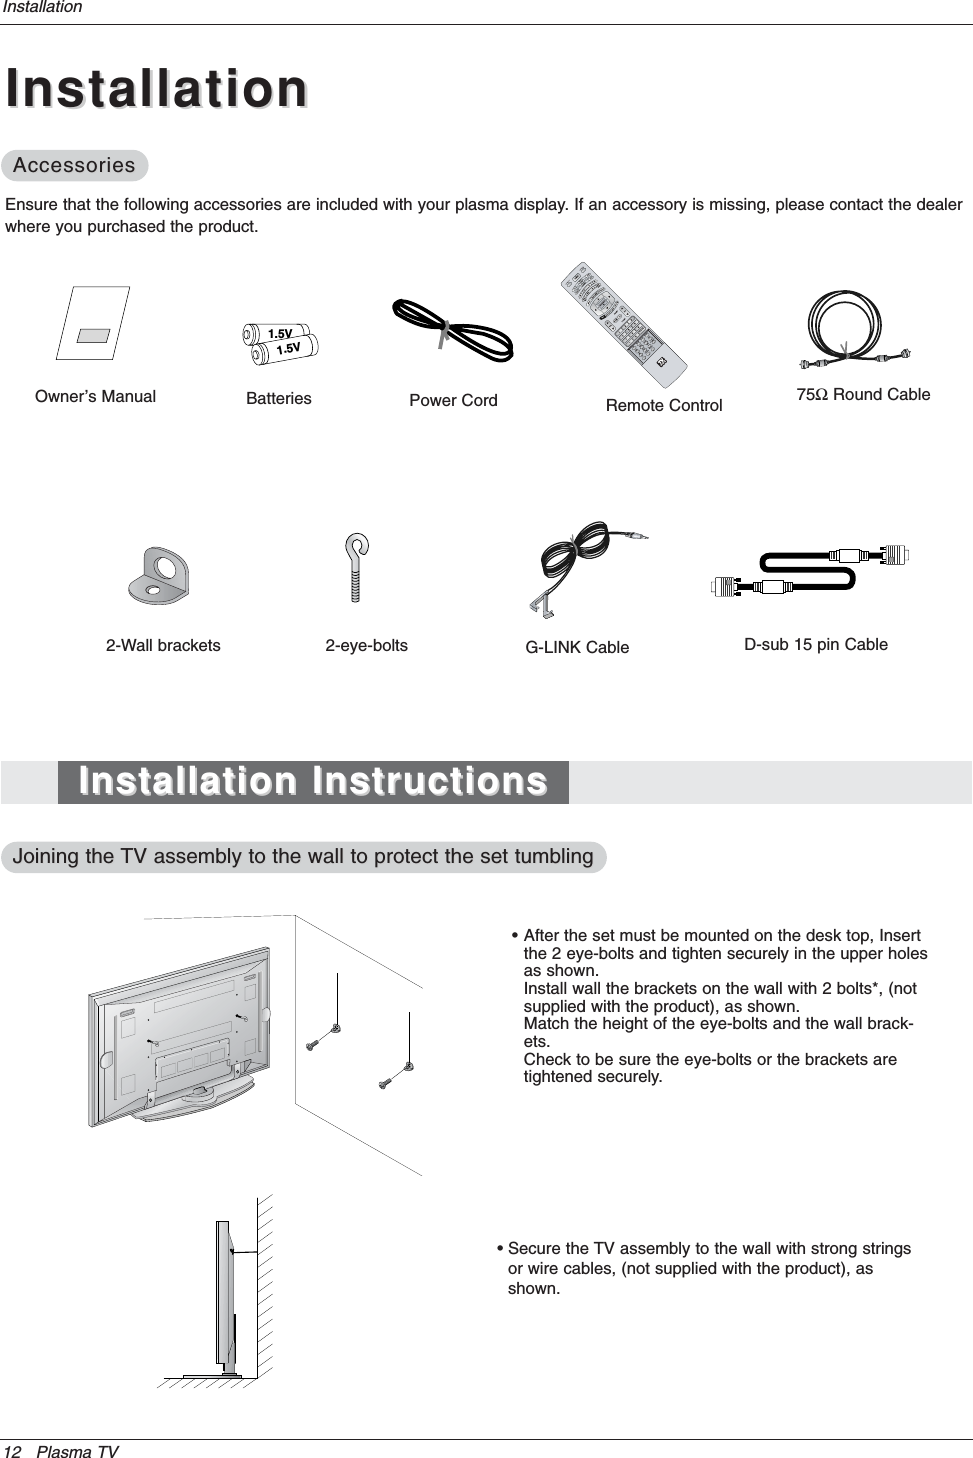 12 Plasma TVInstallationOwner’s Manual1.5V1.5VBatteries Power CordMODEDAY-DAY+FLASHBKAPMCCAUTO DEMOM/C EJECTTV INPUT TV/VIDEO75ΩRound CableEnsure that the following accessories are included with your plasma display. If an accessory is missing, please contact the dealerwhere you purchased the product.• After the set must be mounted on the desk top, Insert the 2 eye-bolts and tighten securely in the upper holesas shown.Install wall the brackets on the wall with 2 bolts*, (not supplied with the product), as shown.Match the height of the eye-bolts and the wall brack-ets.Check to be sure the eye-bolts or the brackets are tightened securely.• Secure the TV assembly to the wall with strong stringsor wire cables, (not supplied with the product), asshown.2-Wall brackets 2-eye-bolts G-LINK CableRemote ControlInstallationInstallationAccessoriesAccessoriesInstallation InstructionsInstallation InstructionsJoining the Joining the TV assembly to the wall to protect the set tumblingTV assembly to the wall to protect the set tumblingD-sub 15 pin Cable